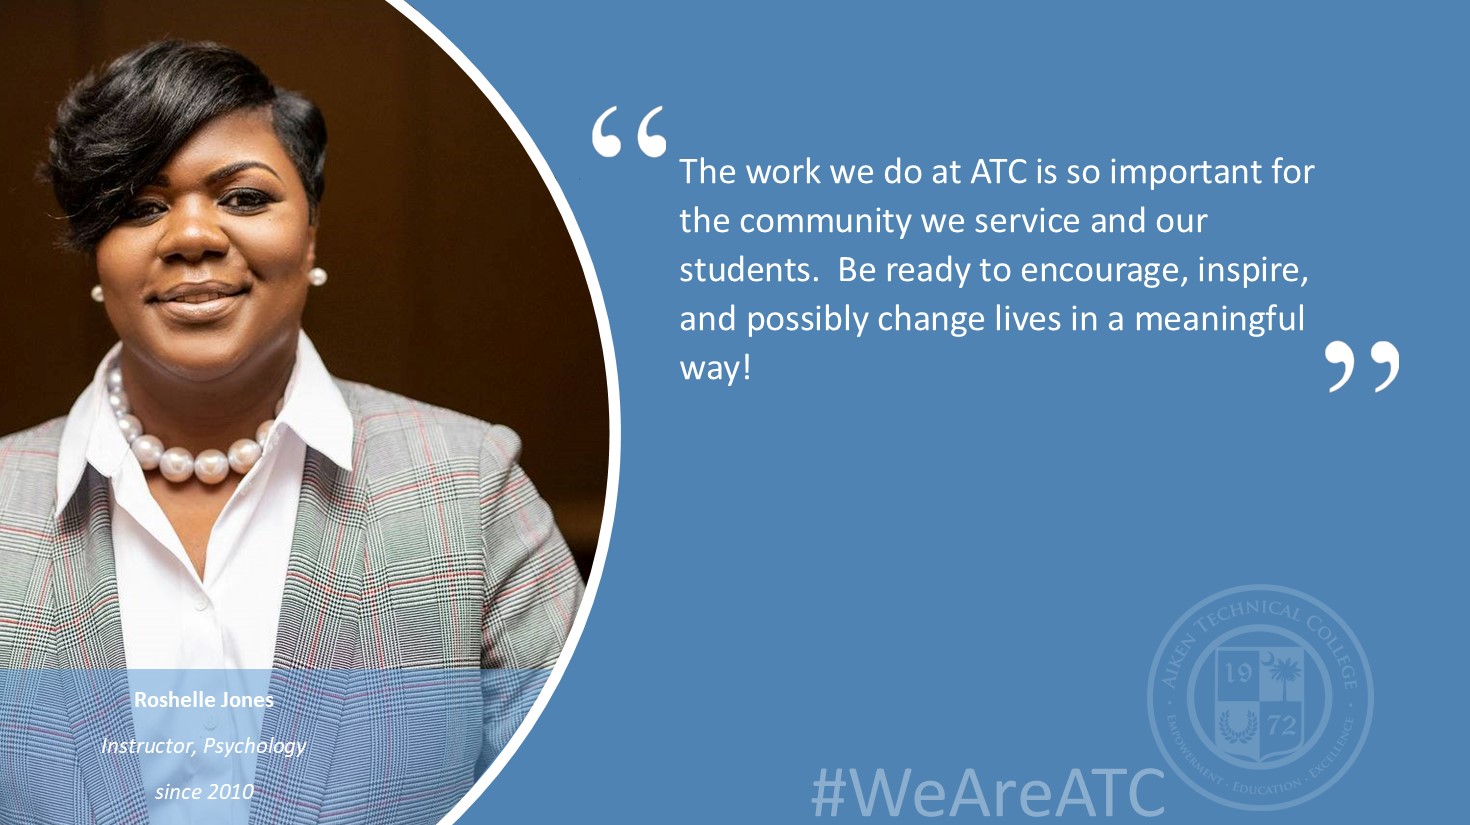 "The work we do at ATC is so important for the community we service and our students. Be ready to encourage, inspire, and possibly change lives in a meaningful way!"